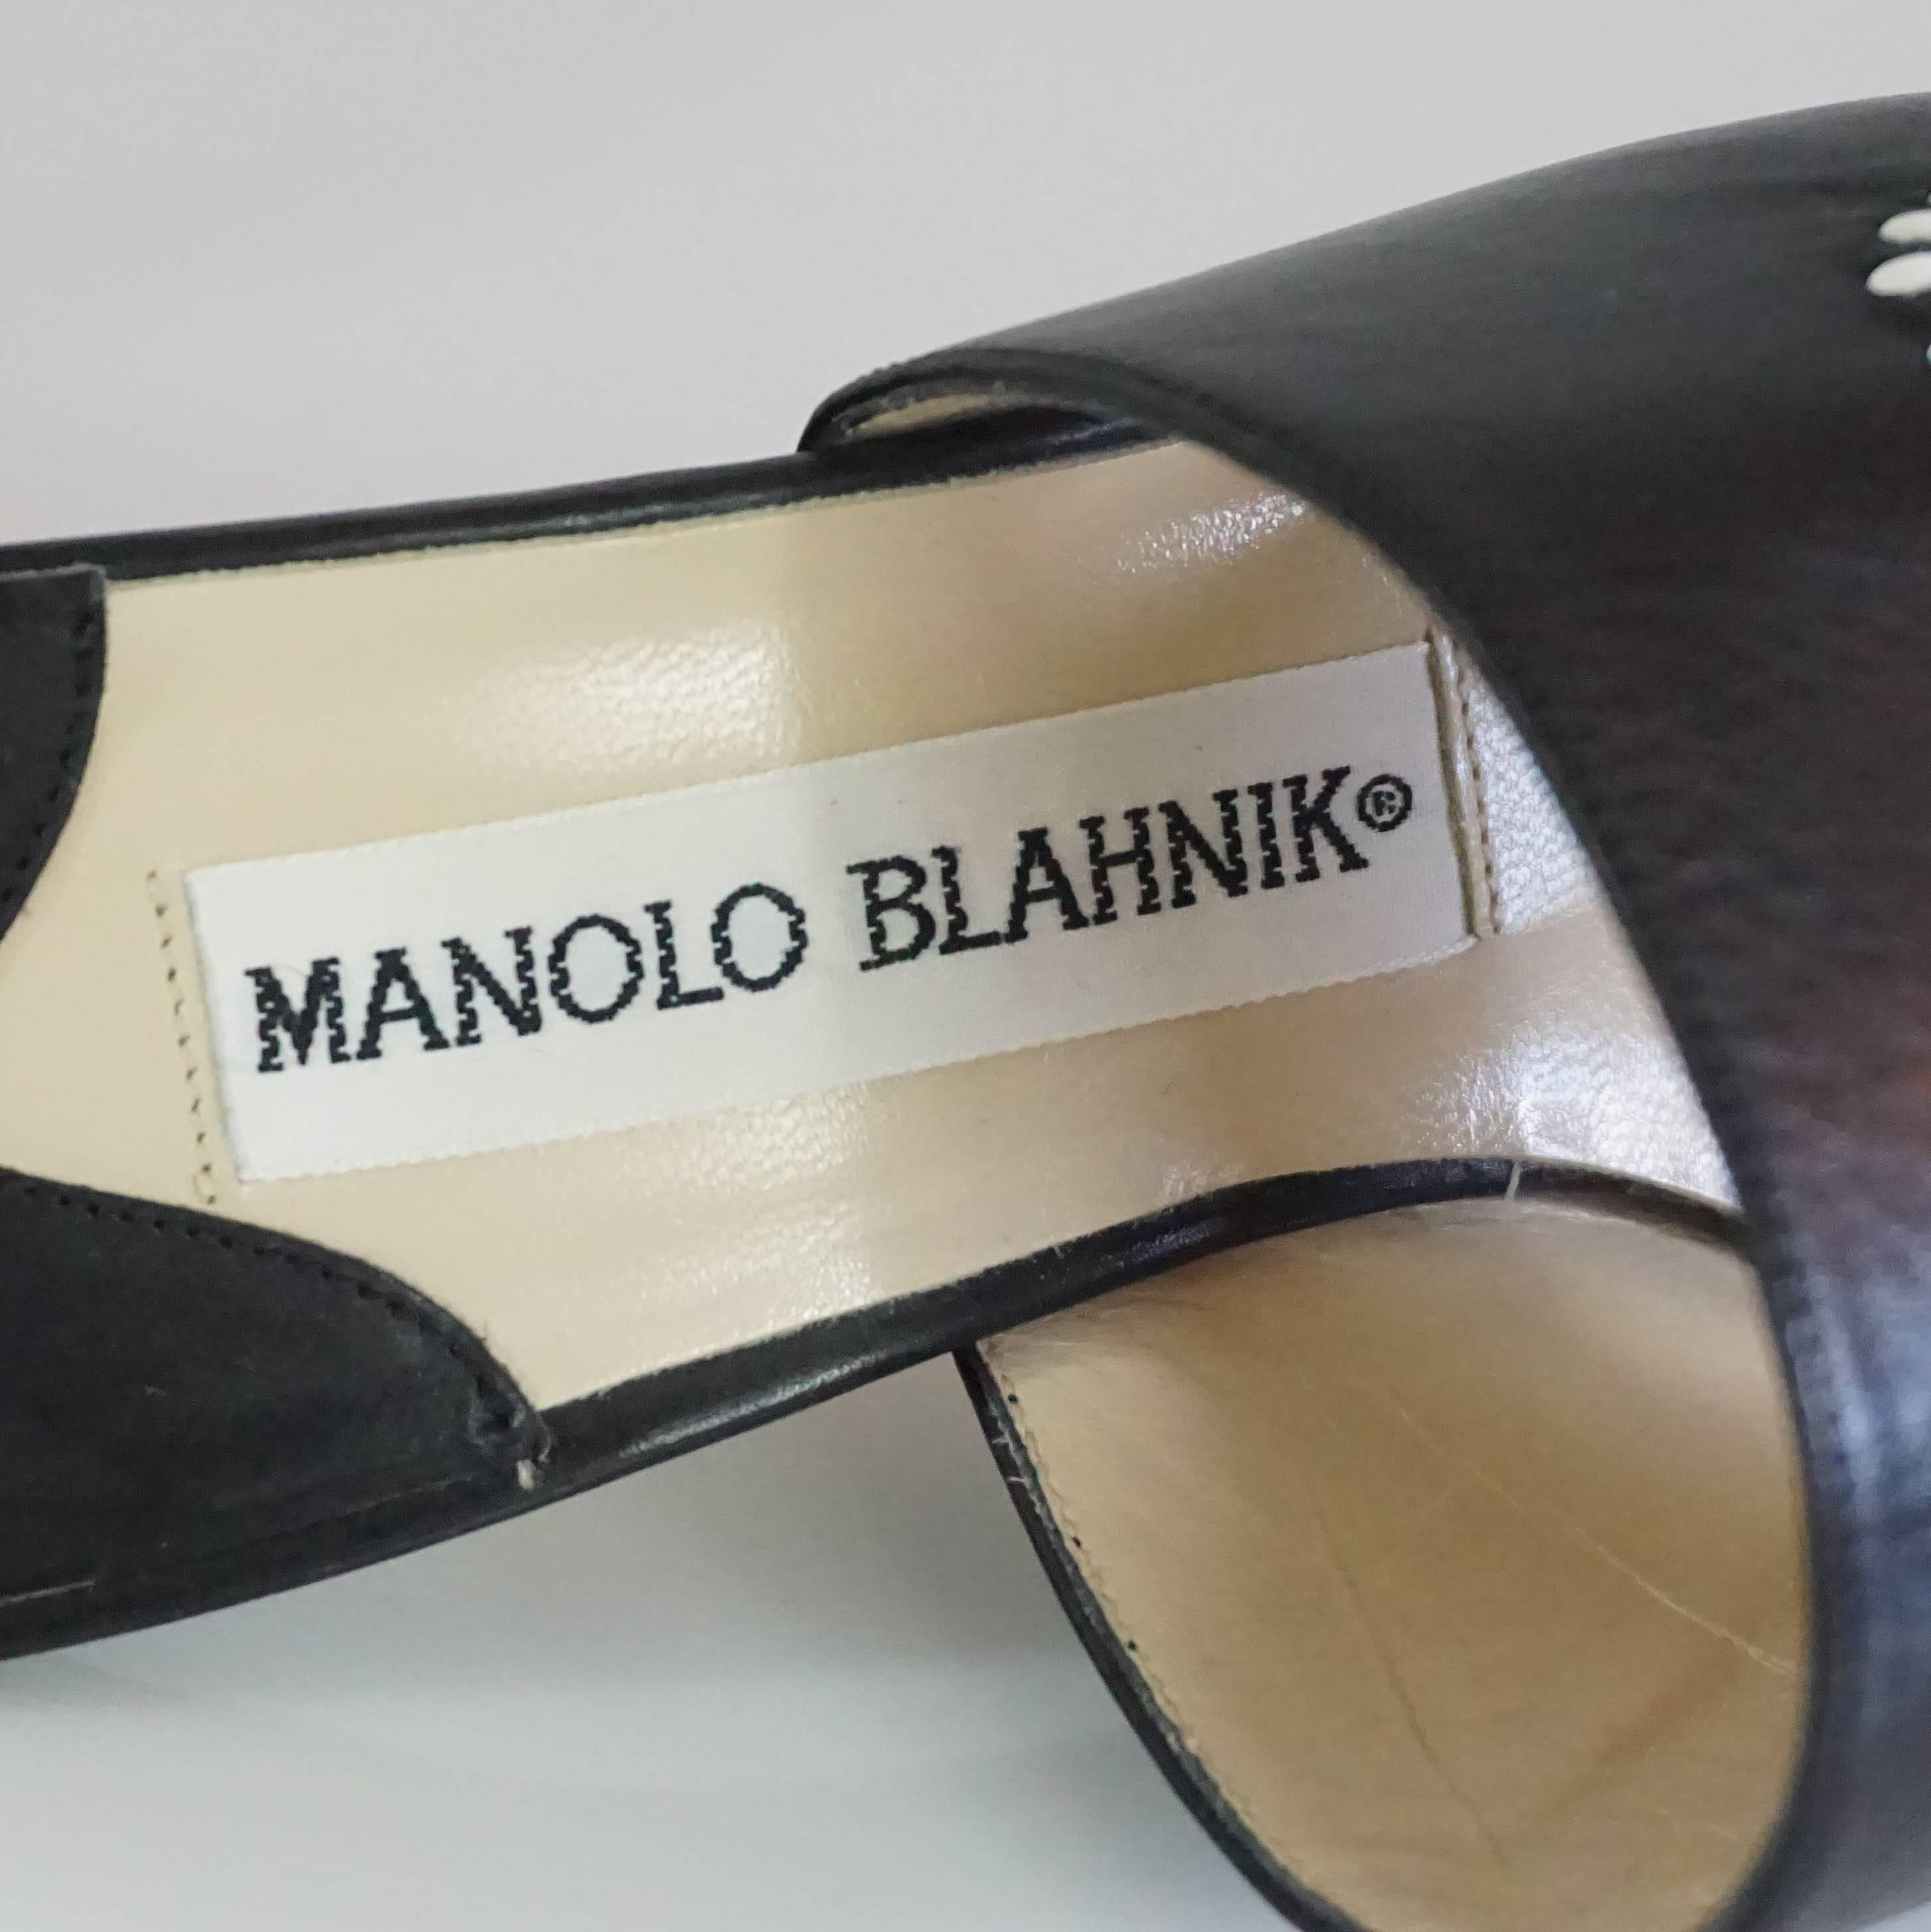 Manolo Blahnik Black Leather Mules with White Stitched Cutouts - 37 3